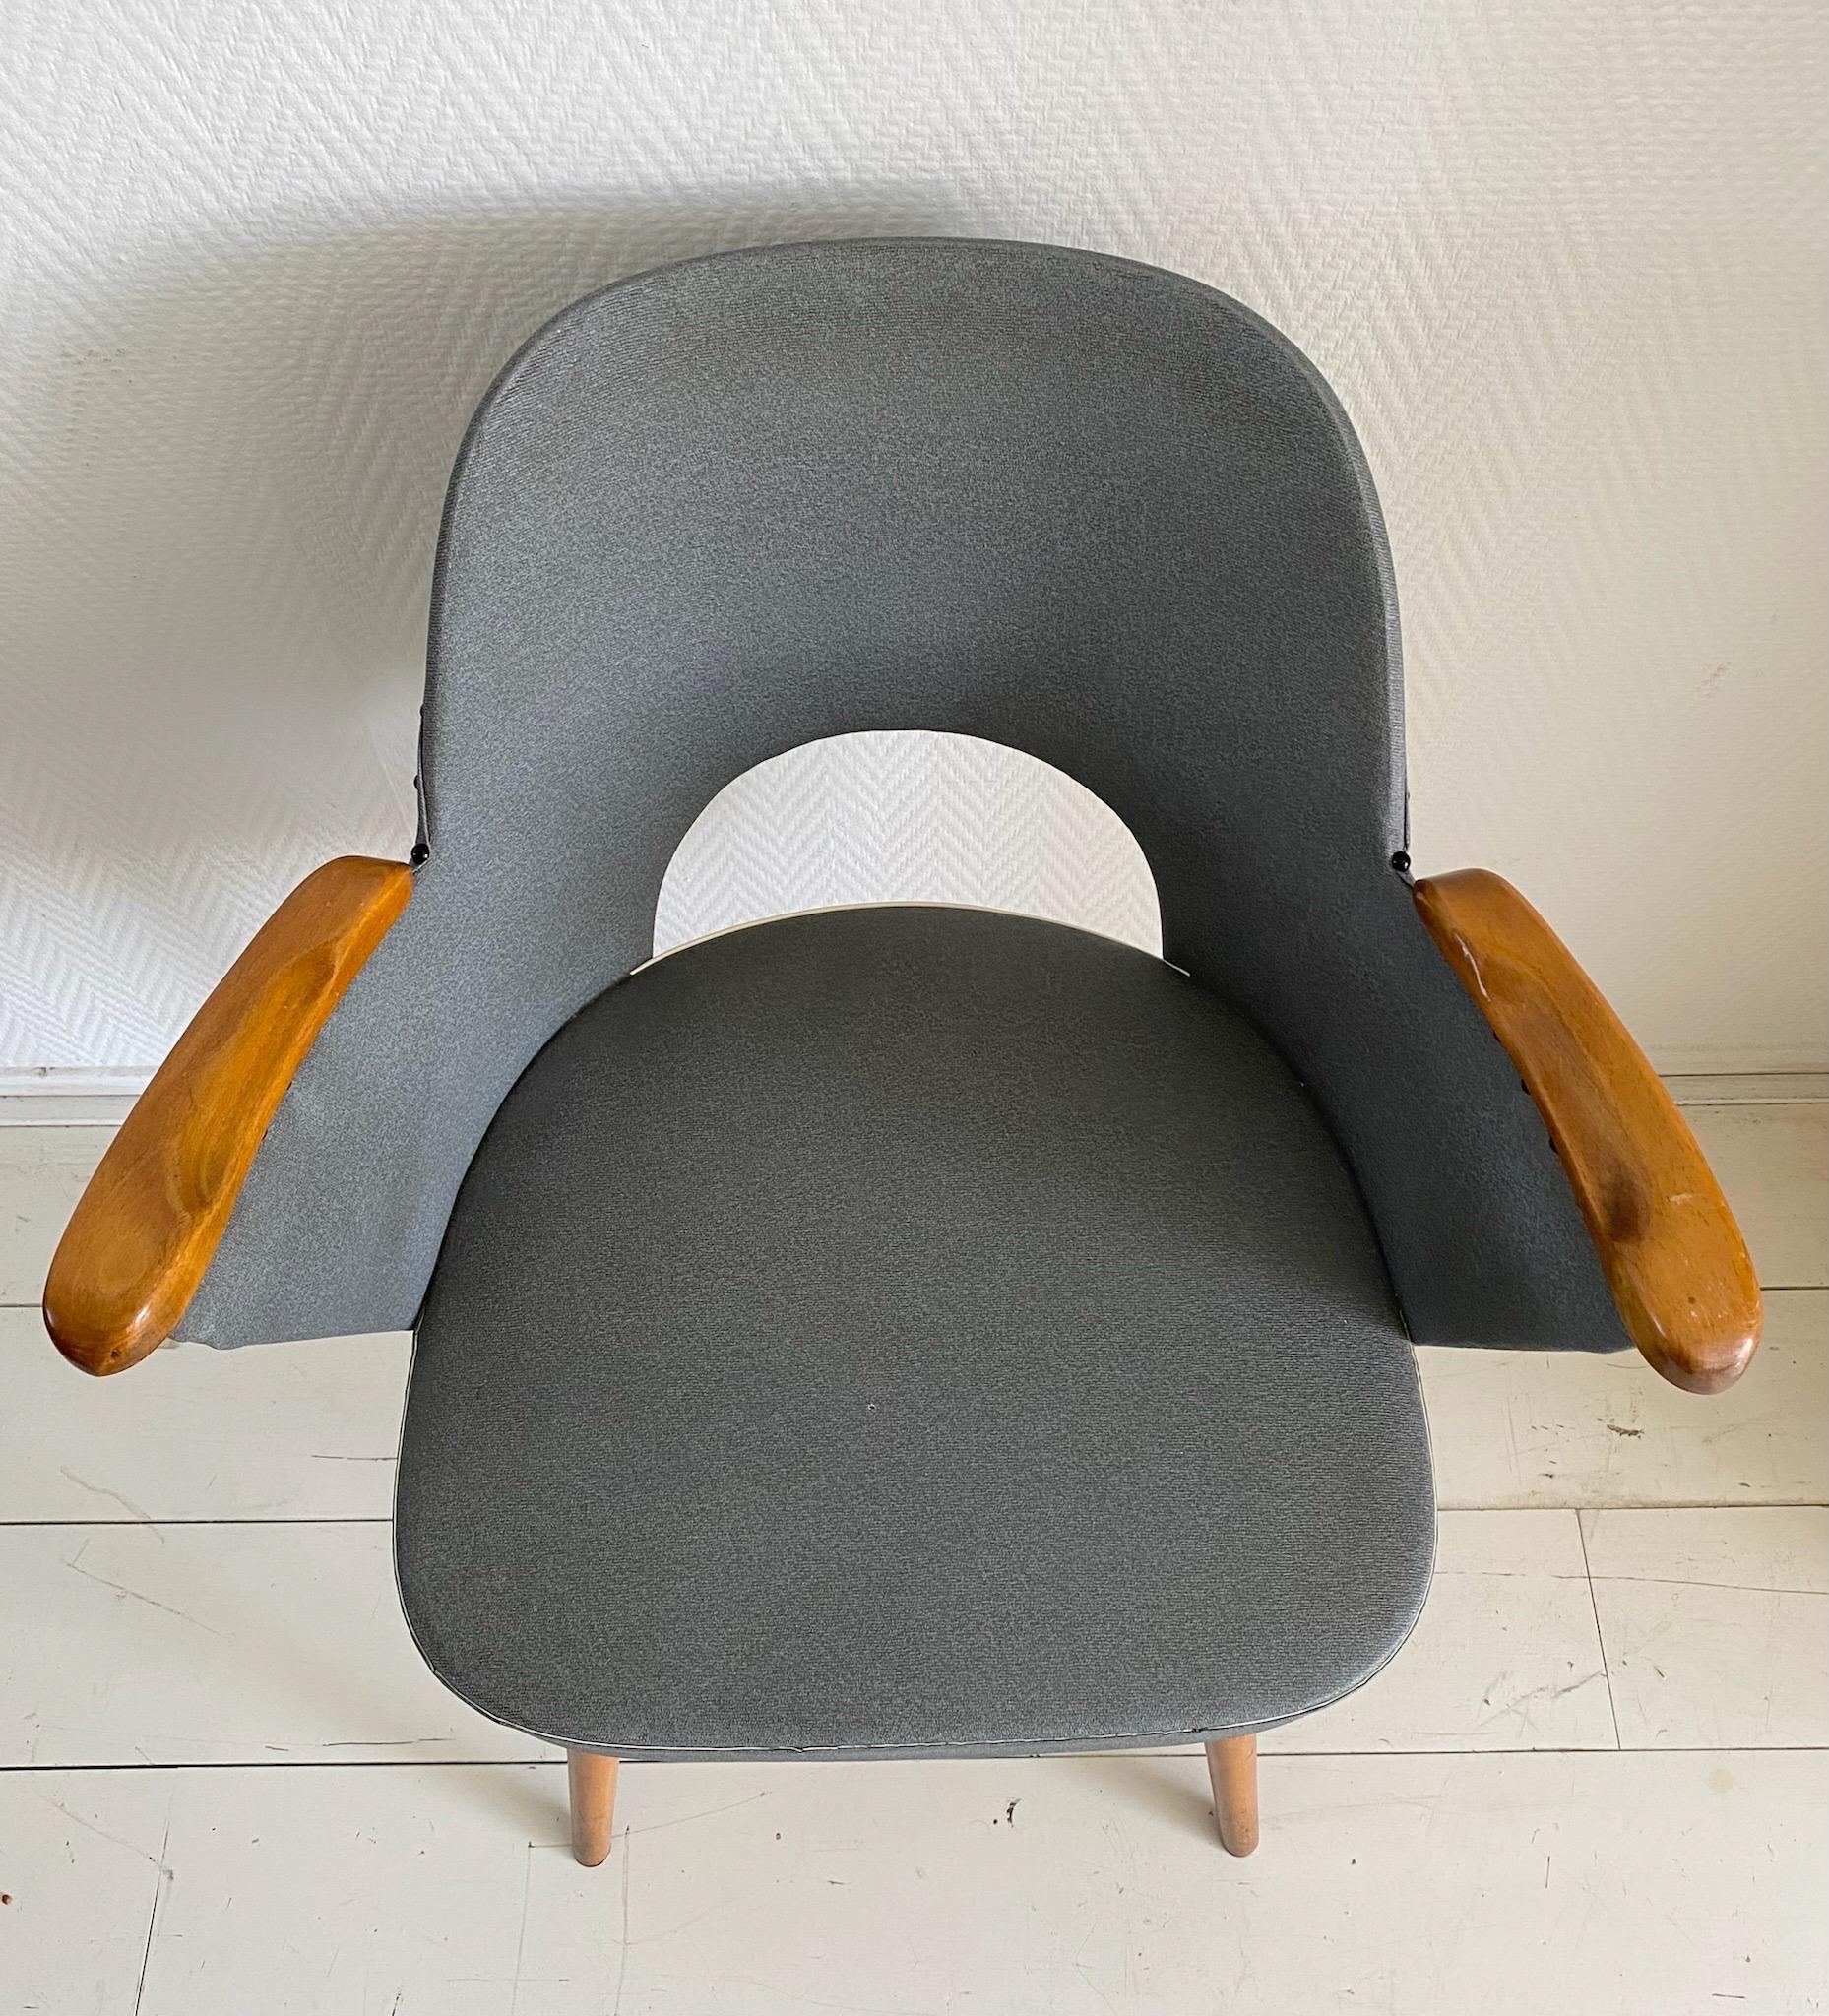 Faux Leather Thonet Armchair with Leatherette Upholstery by Oswald Haerdtl, ca. 1950's For Sale